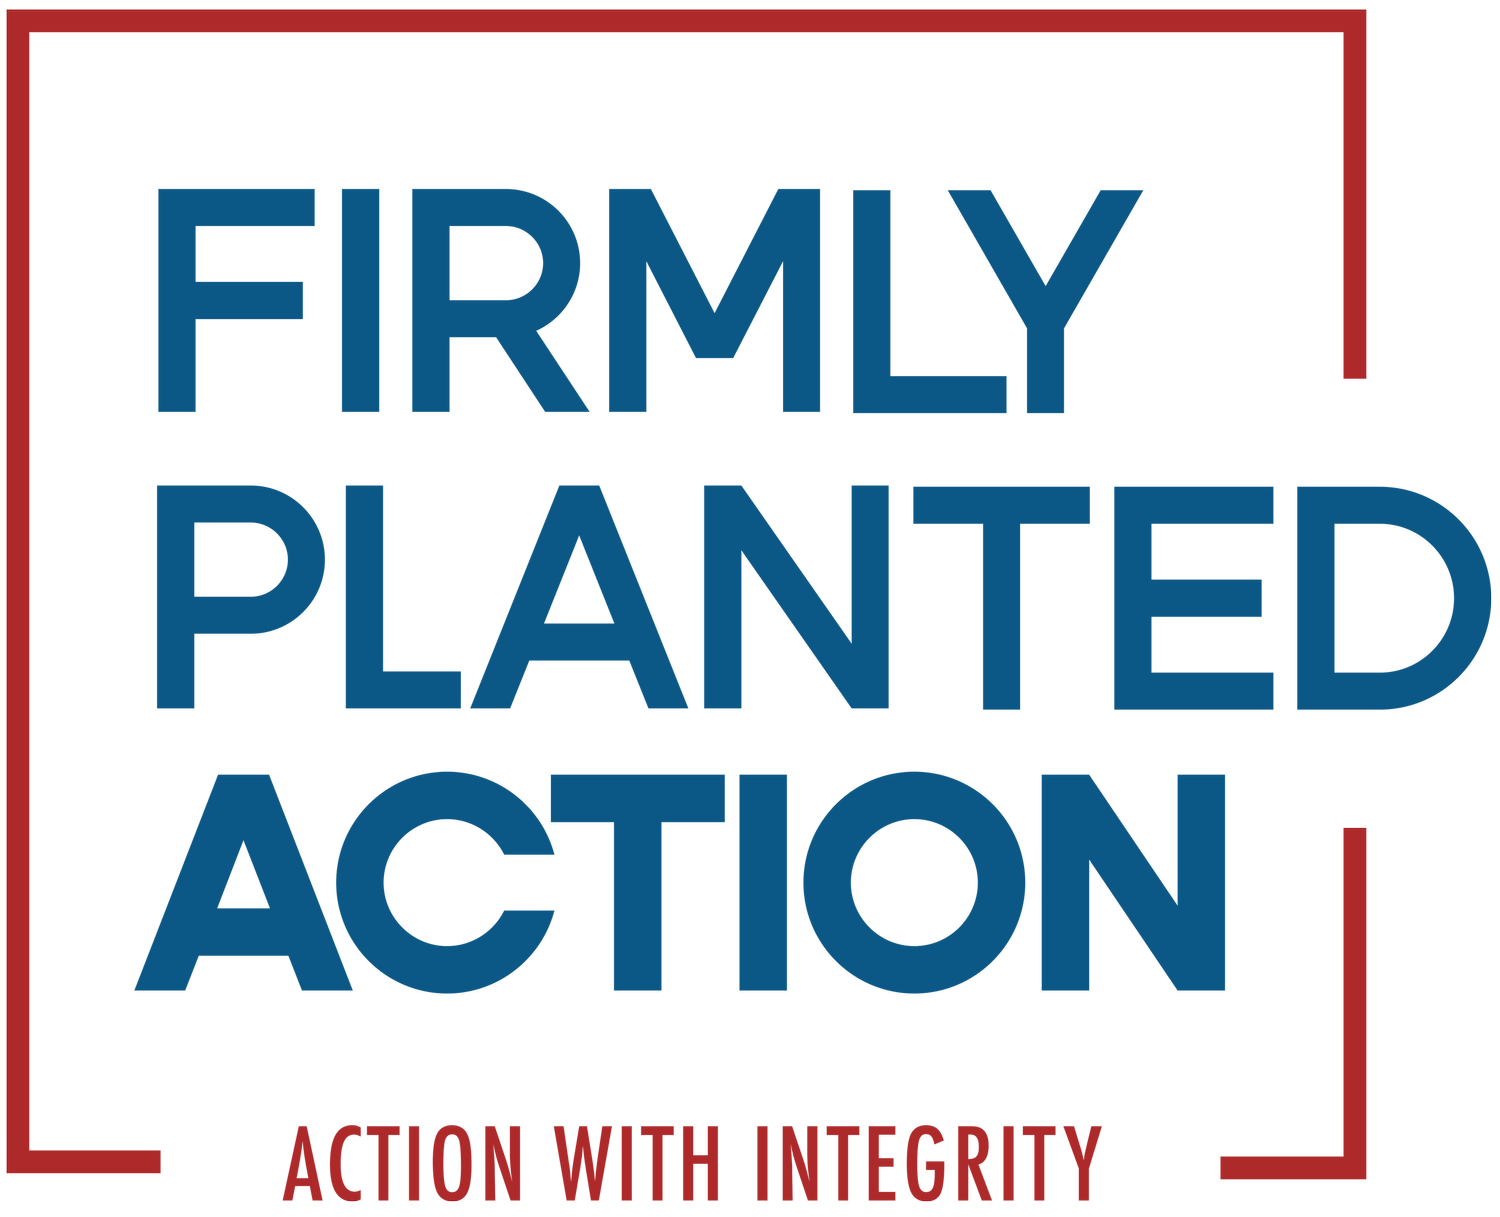 Firmly Planted Action